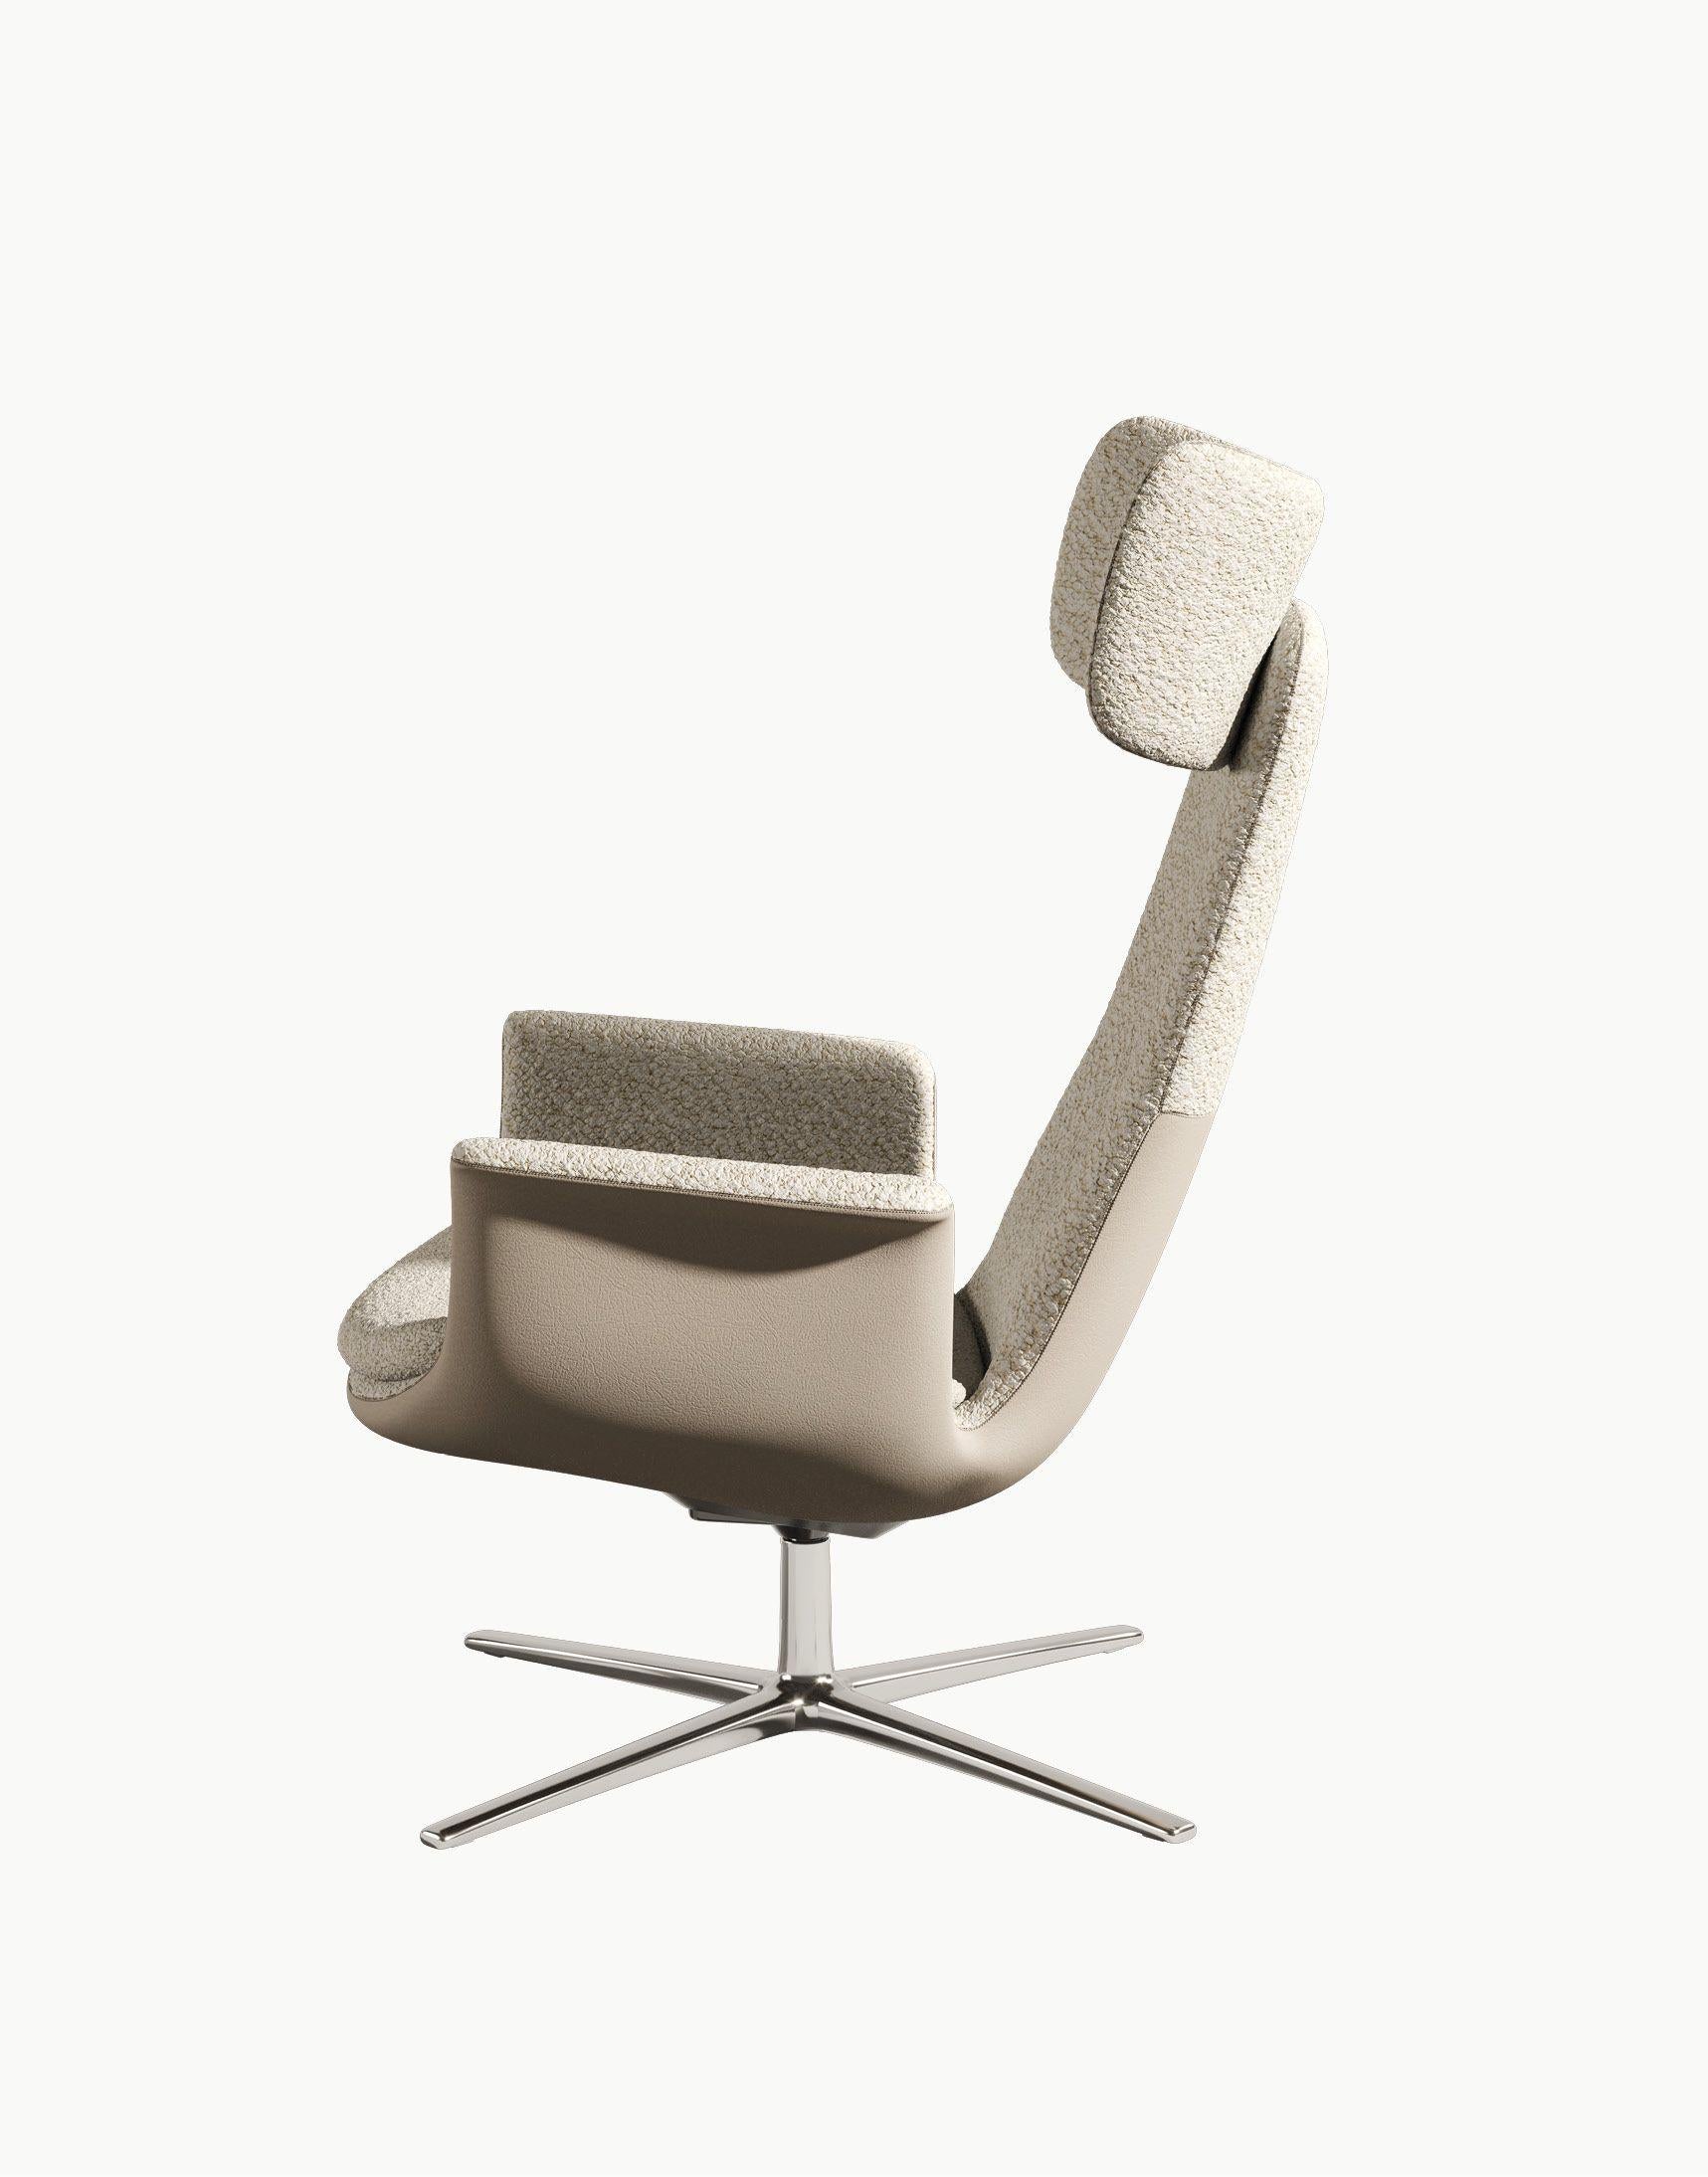 Odyssey is an out-of-this world armchair designed by Eugeni Quitllet for BD. The meeting of earth-bound ergonomic forms, comfort and imaginative flight of fancy.

Small headrest
75 x 81 x h.107 cm
30 x 32 x h.42 inch

Large headrest
75 x 81 x h.111